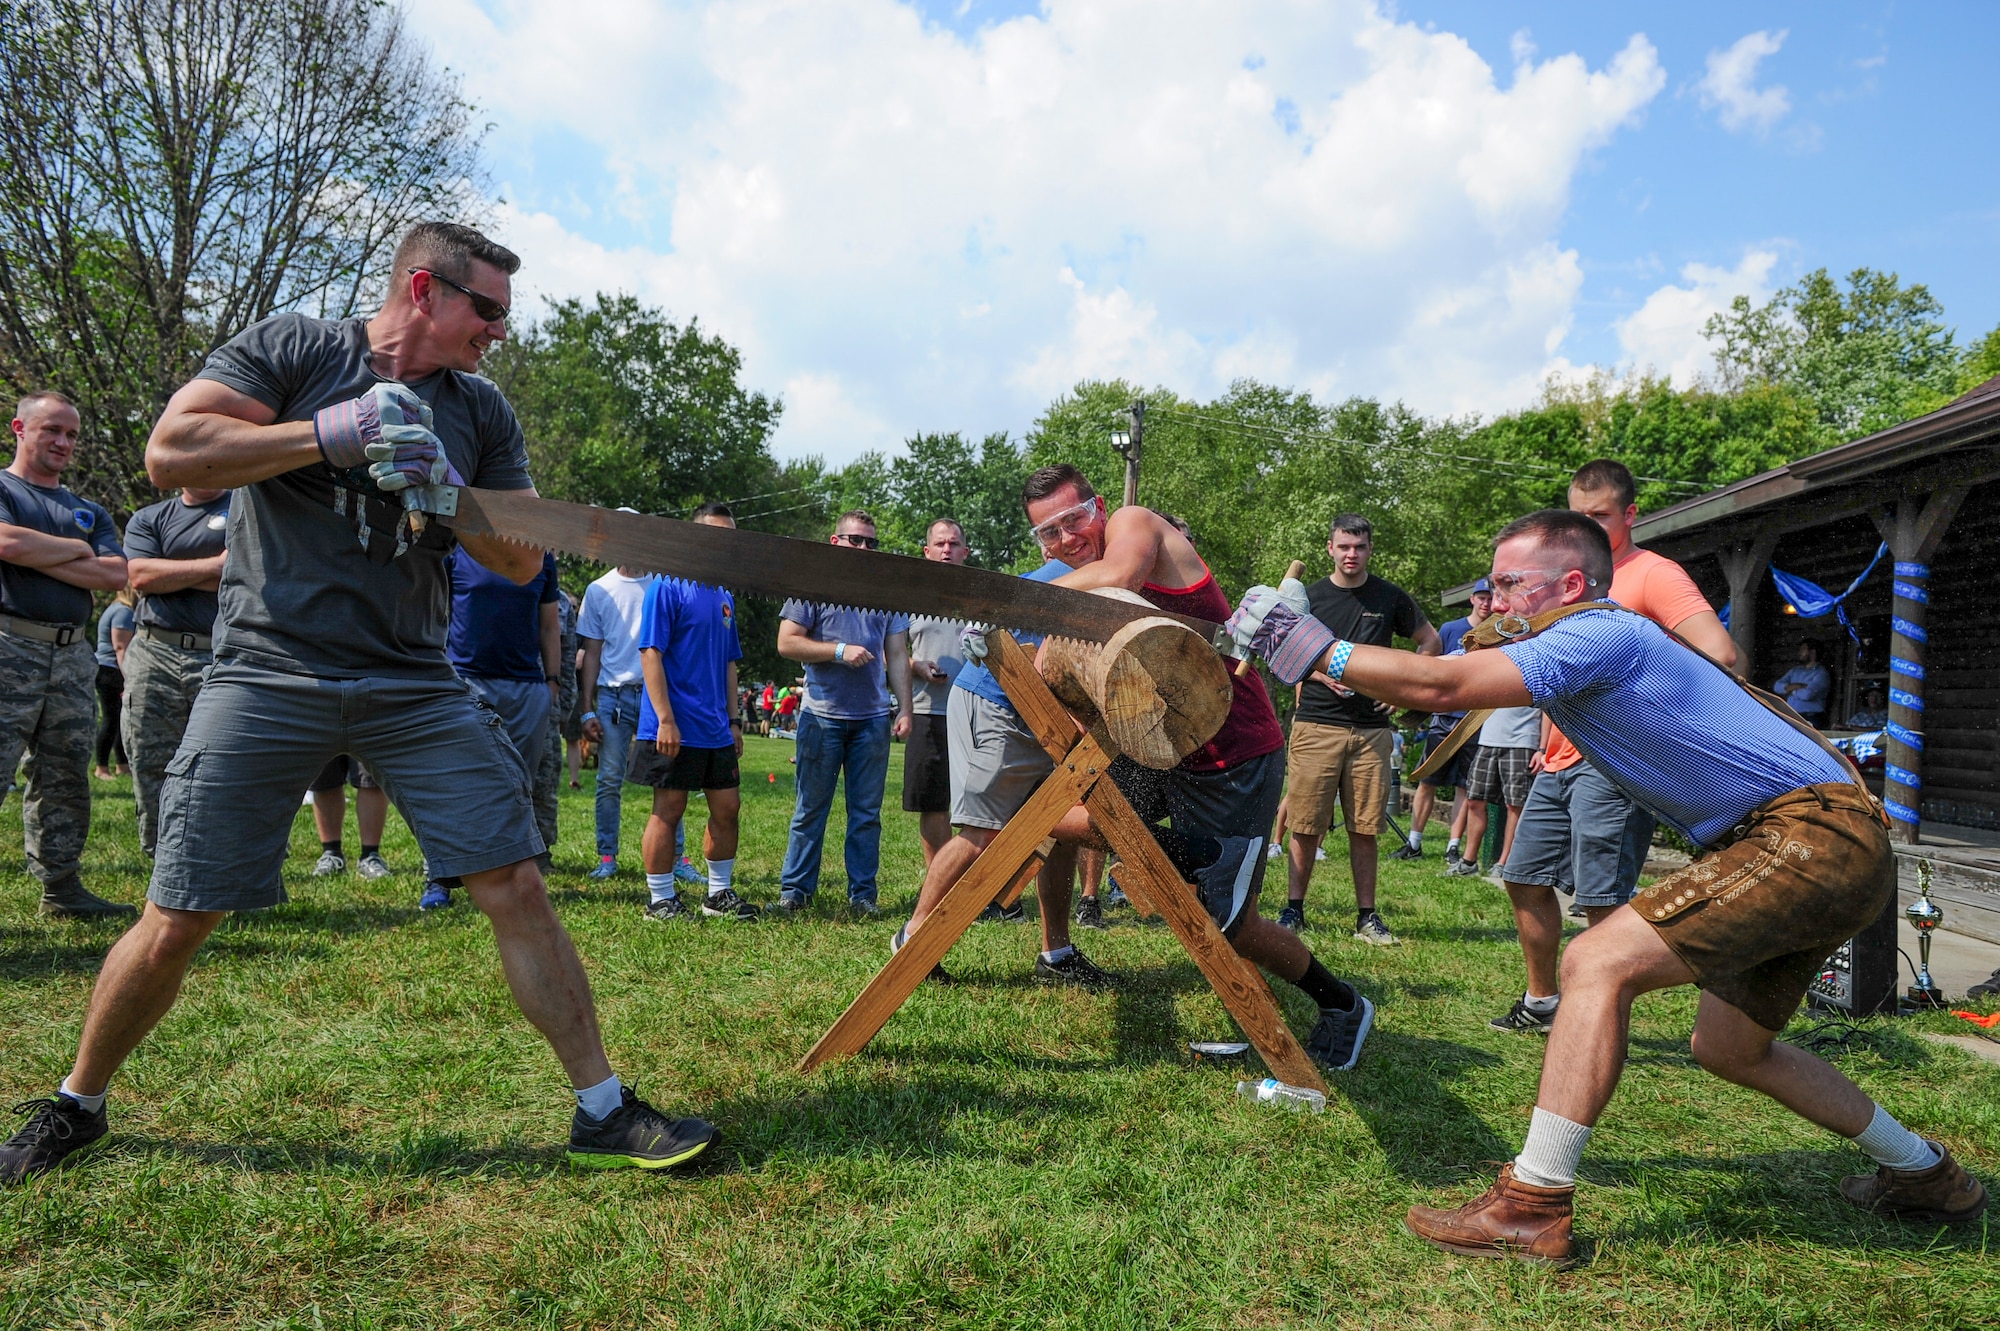 Members of the National Air and Space Intelligence Center compete in a log sawing competition during the National Air and Space Intelligence Center’s 50th Oktoberfest on Wright-Patterson Air Force Base, Ohio, Sept. 21, 2018. The groups of NASIC competed for bragging rights and the Oktoberfest Cup award. (U.S. Air Force photo by Senior Airman Michael Hunsaker)